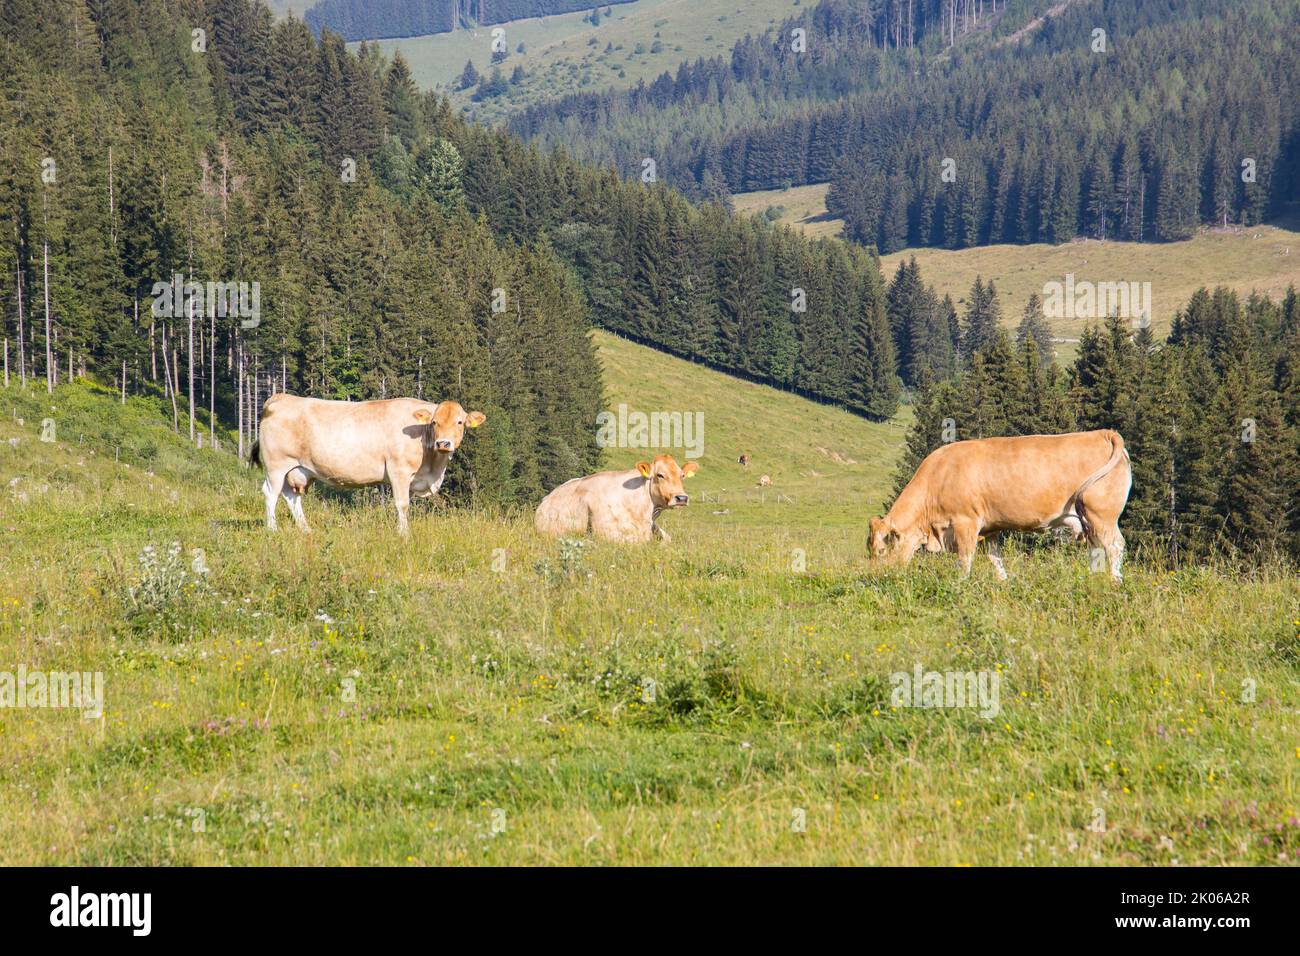 Husbandry with cows on an idyllic mountain landscape in Austria Stock Photo